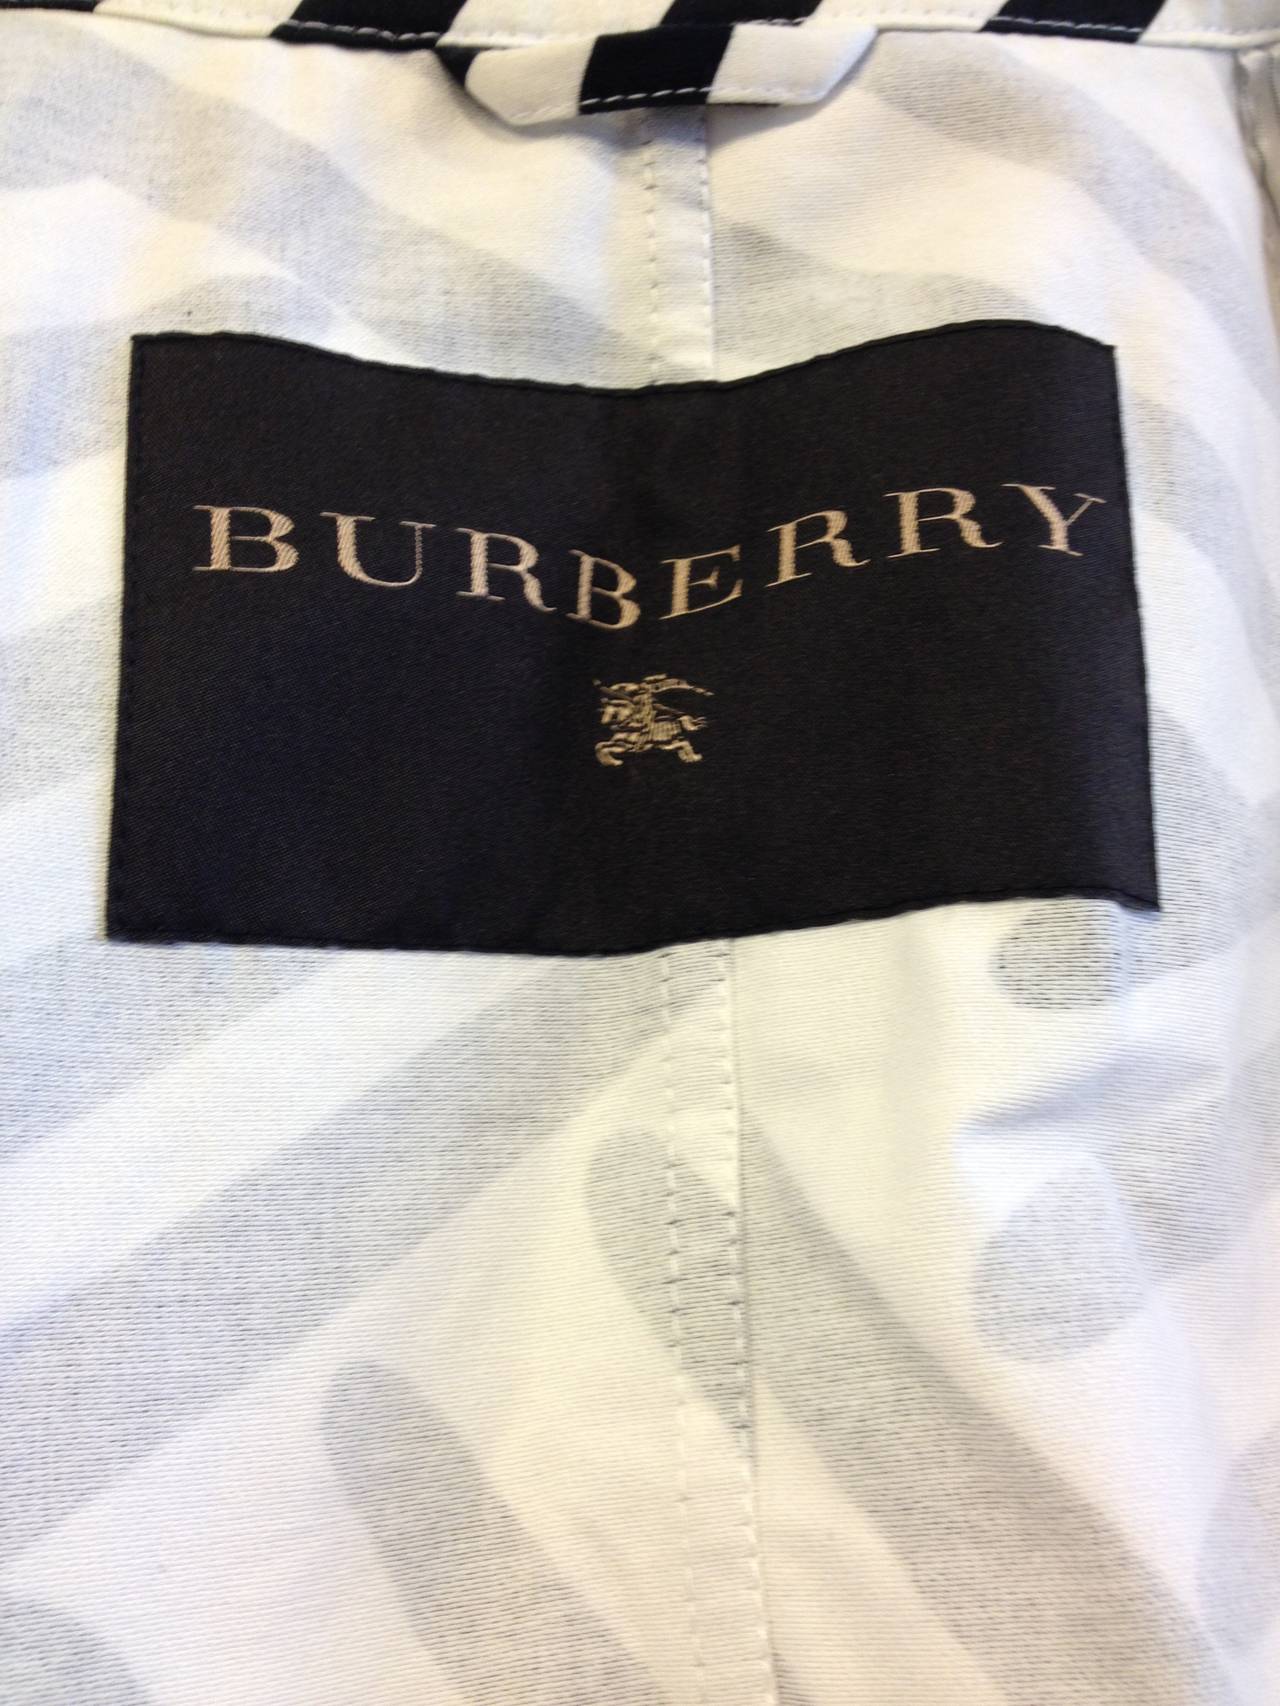 Burberry goes wild! This piece is rooted in the iconic trench coat, with the same collar and button-down flaps over the chest, but it becomes something fully new with its ultra graphic brushstroke print in bold black and white and its flared